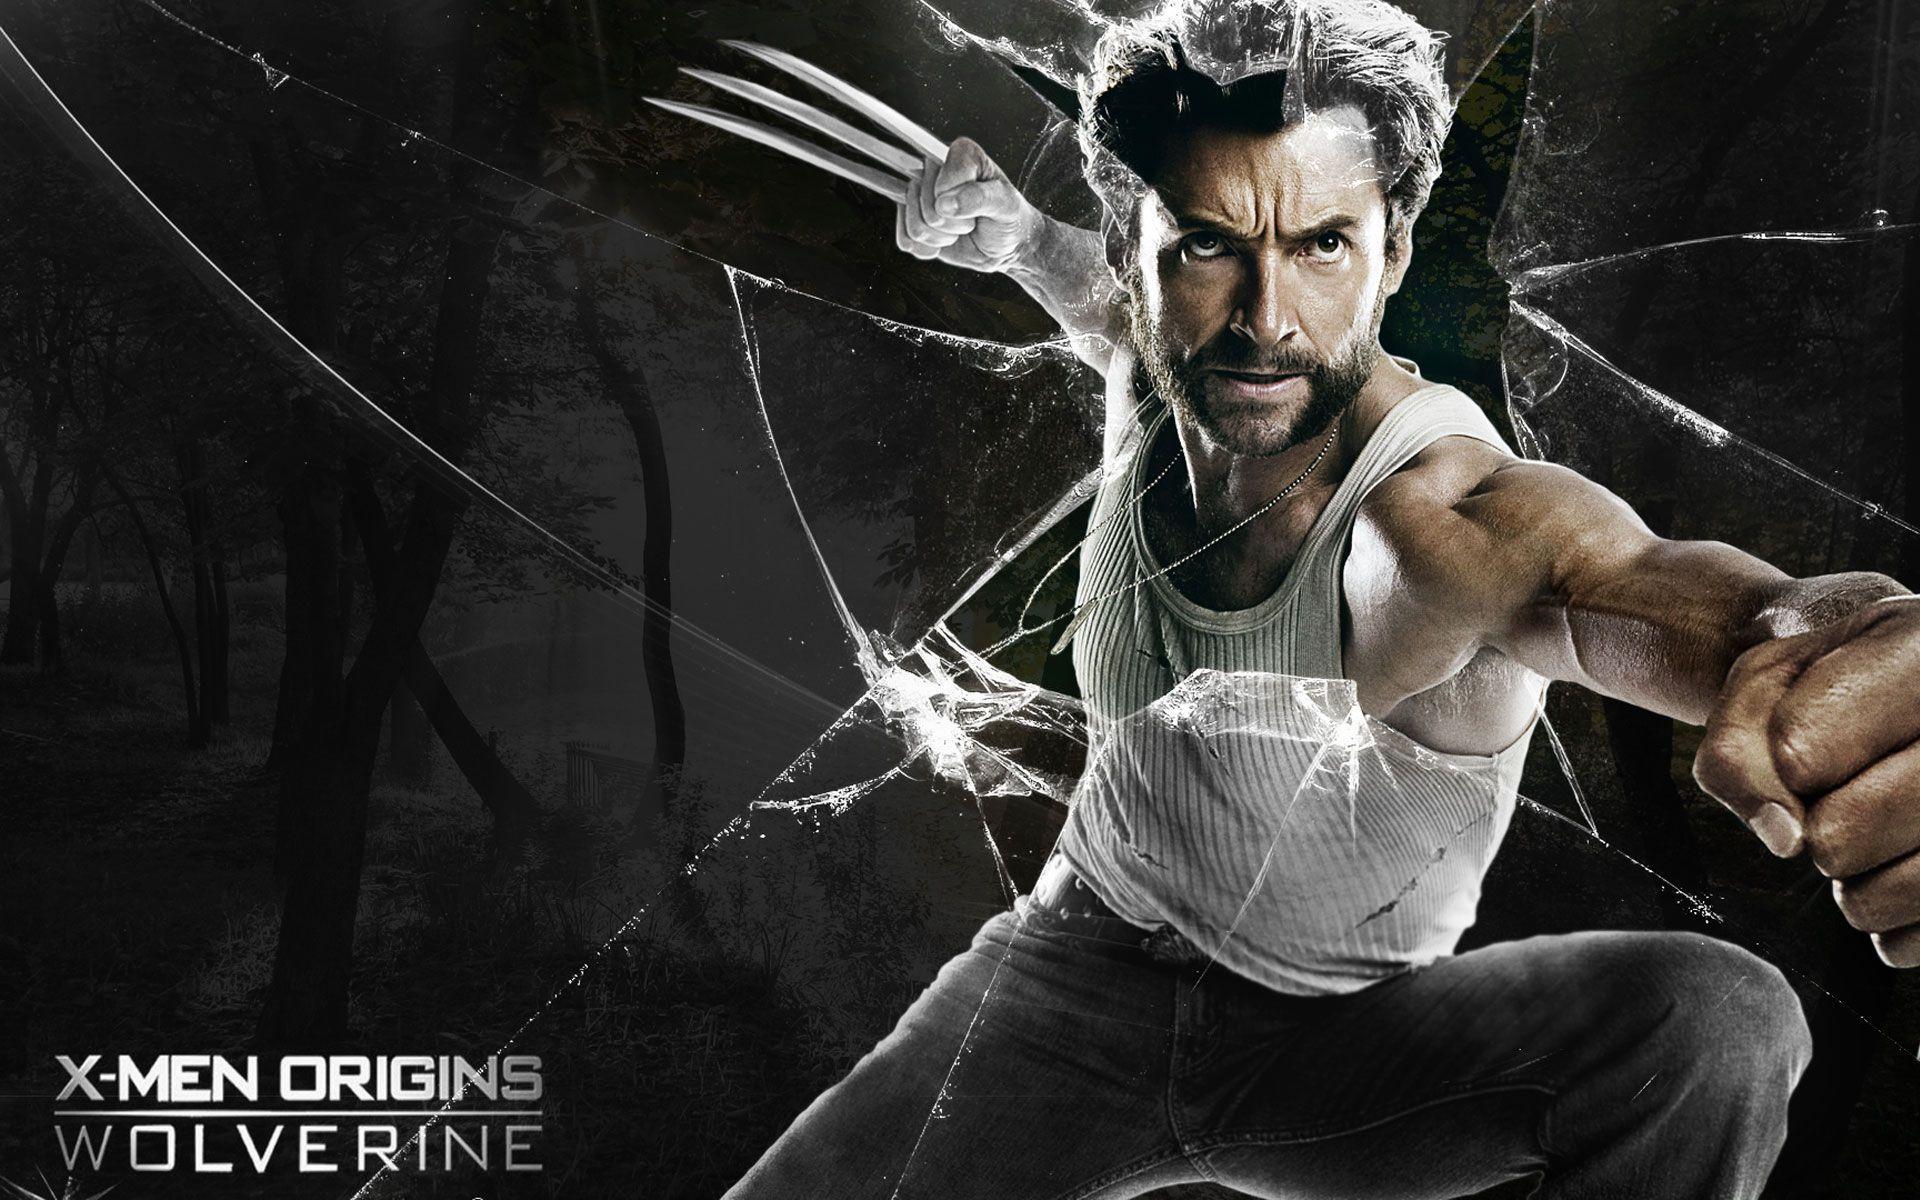 Wallpaper The Wolverine Picture Wallpaper. Wolverine picture, Wolverine movie, Movie wallpaper